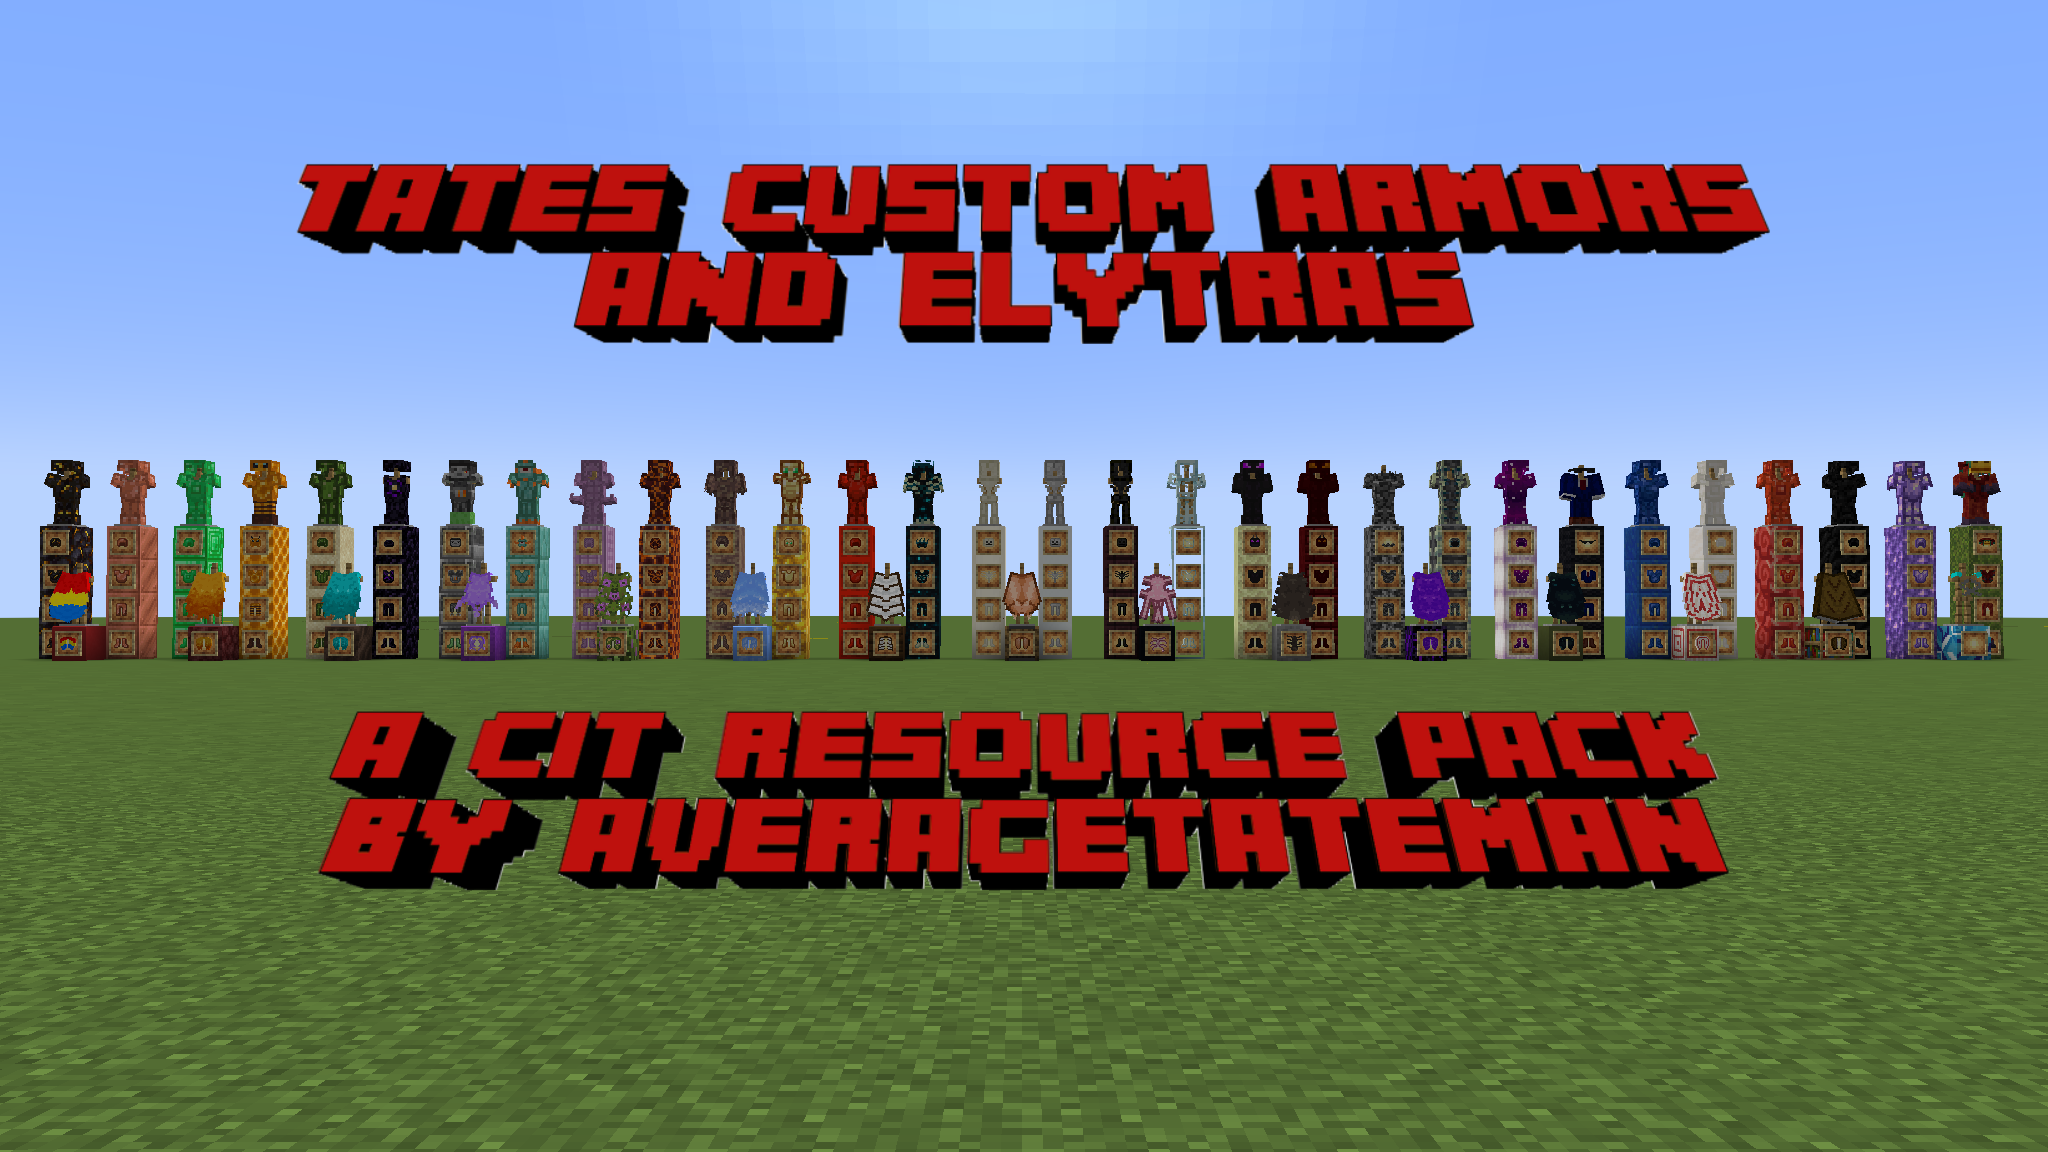 New Armors and Elytras!